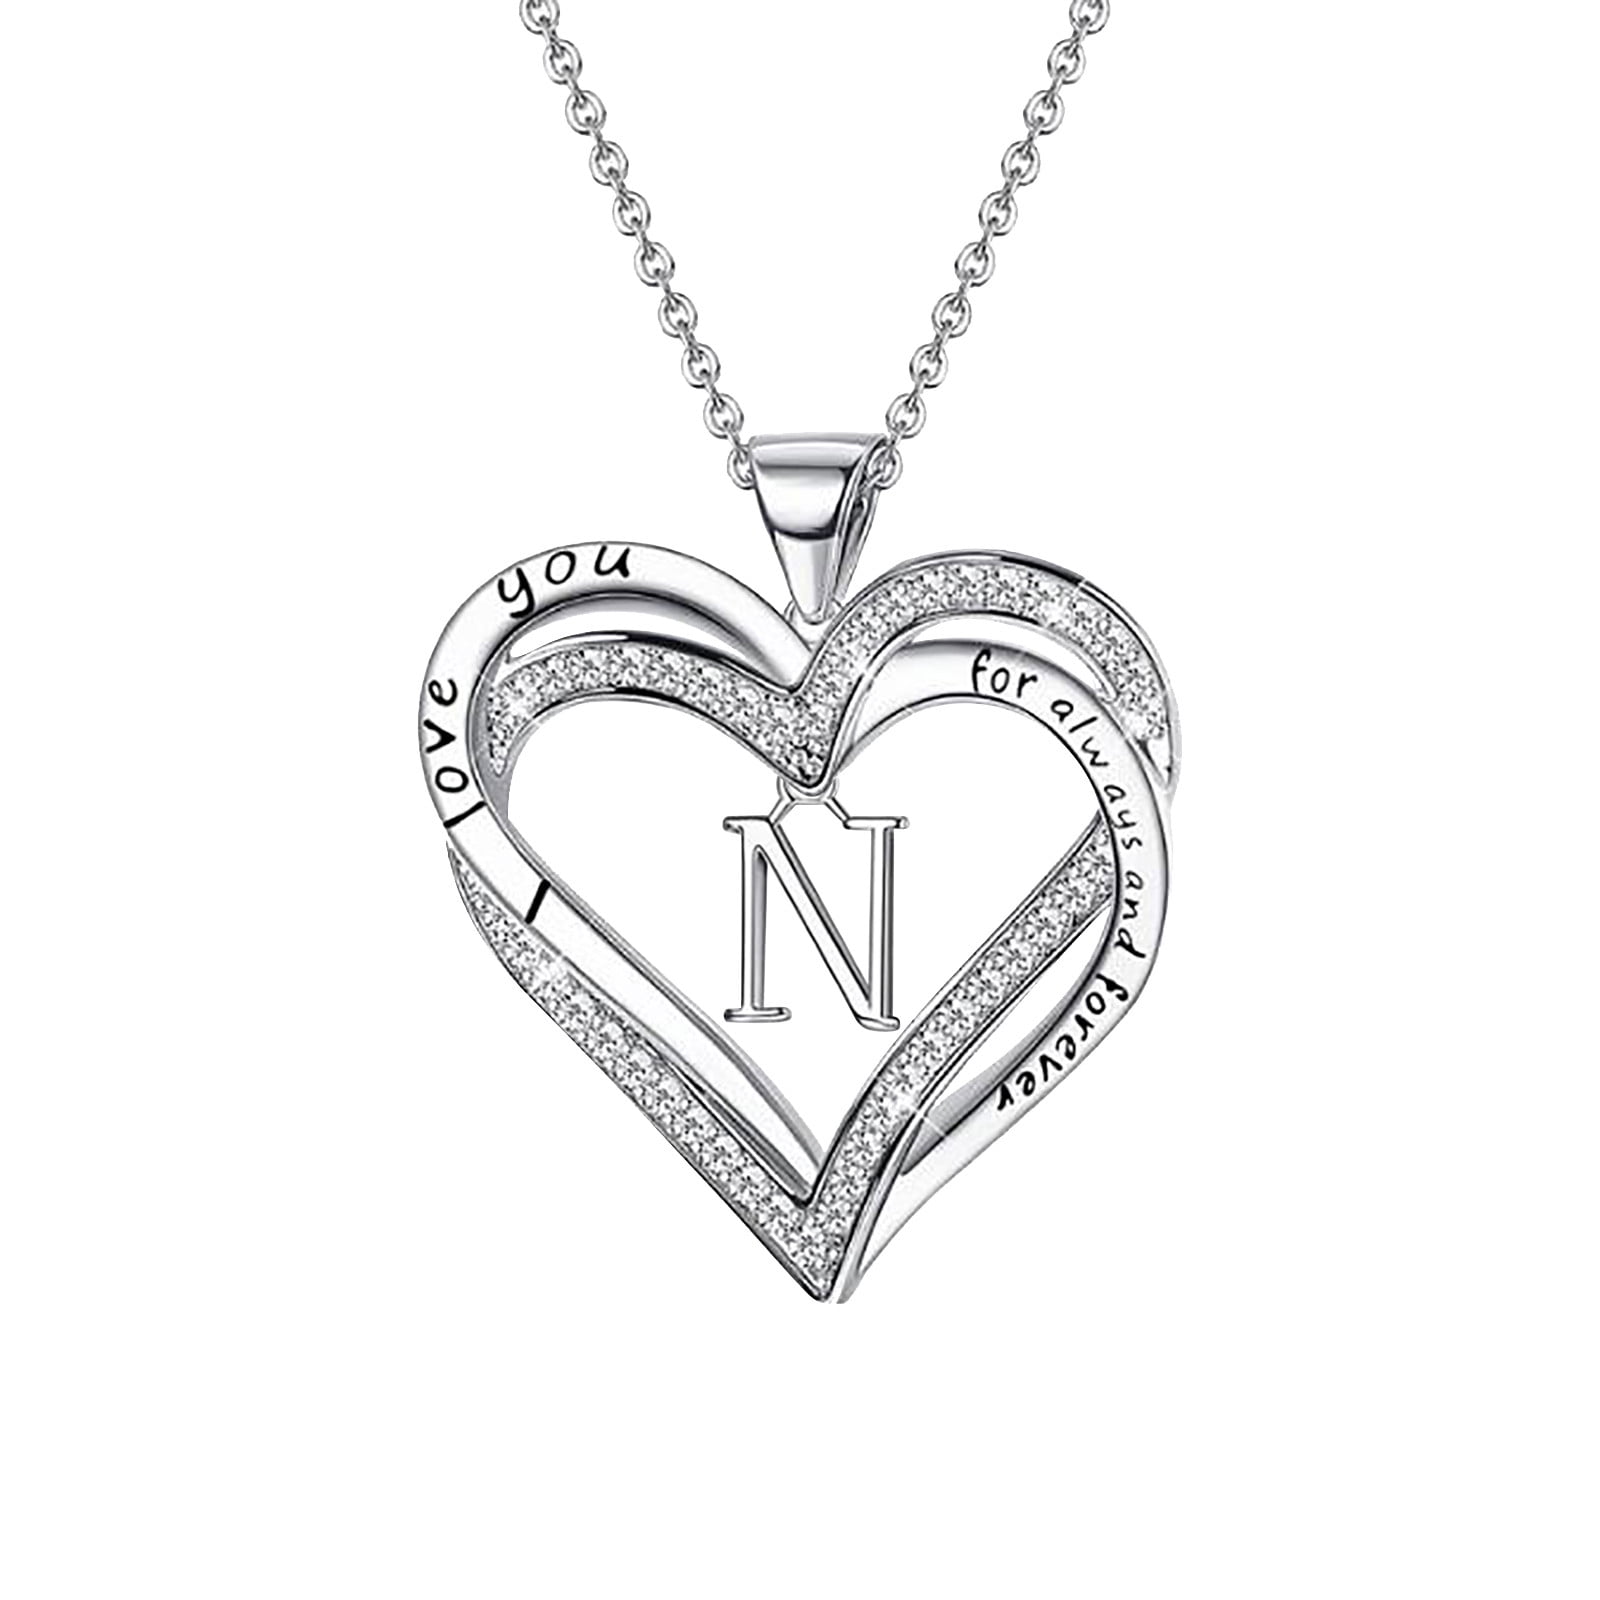 Details about   Vintage 1CT Heart Moissanite Necklace Women Wedding Nickel Free Jewelry Gift 